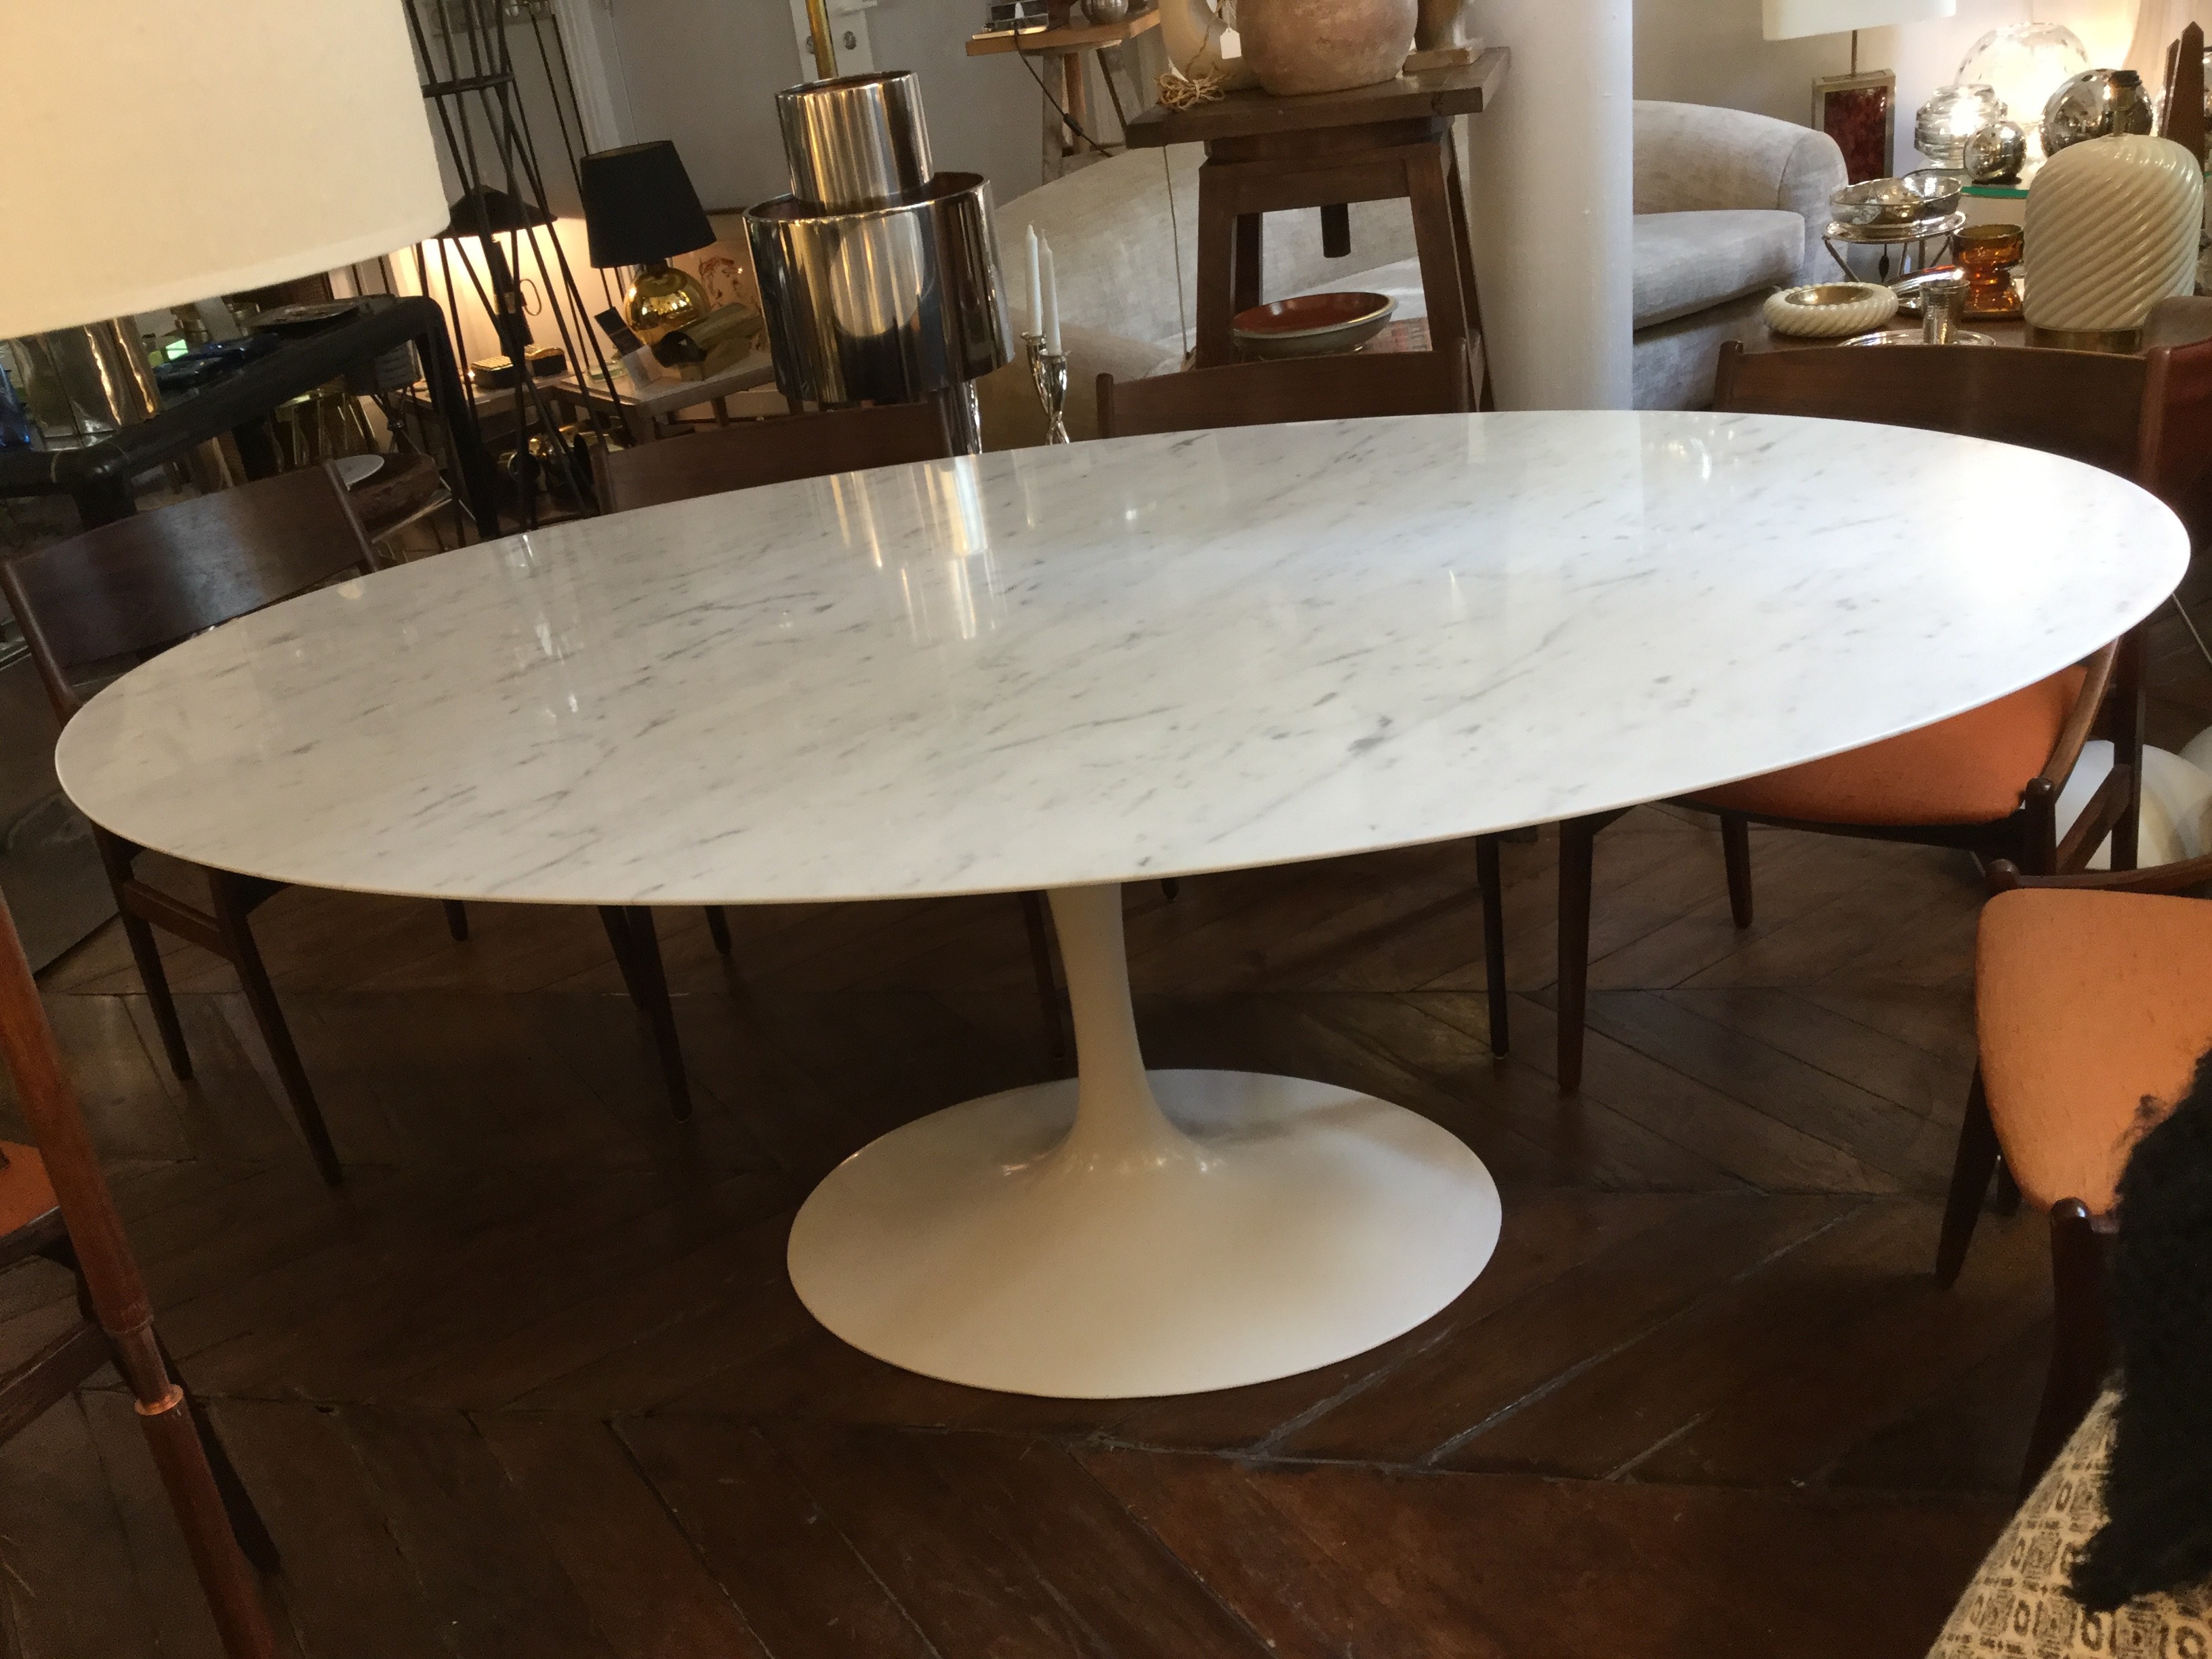 White Oval Pedestal Dining Room Table